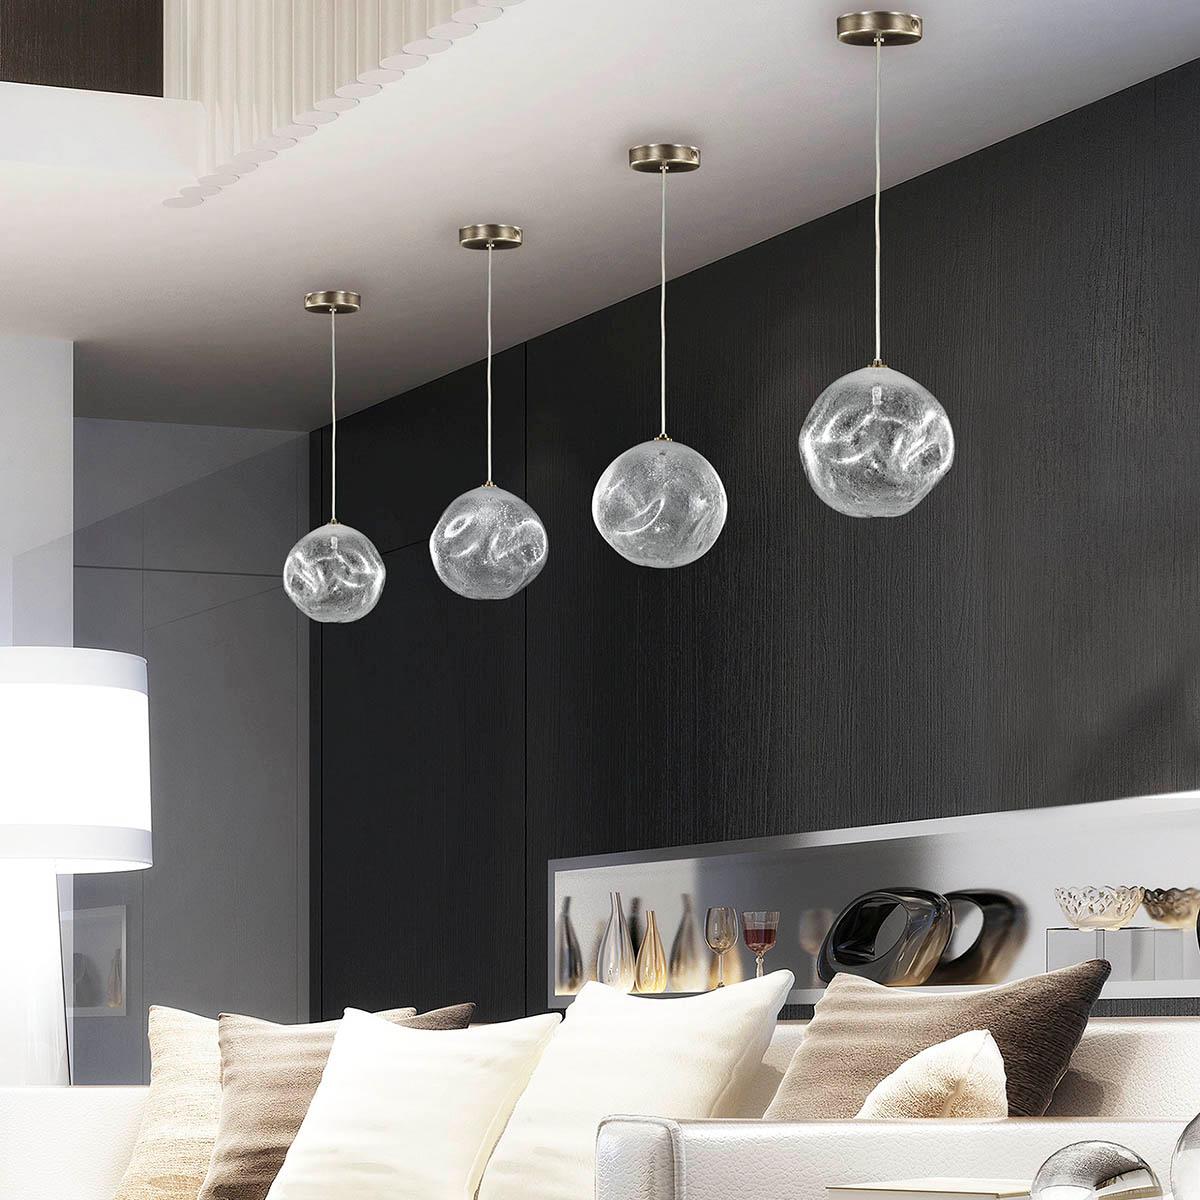 Artistic suspension lamp, glass sphere in clear Murano glass.
Elegant and unmistakable, suggestive and poetical, soft and delicate are some of the adjectives that can be used to describe the blown glass ball chandelier Desafinado, our ceiling light